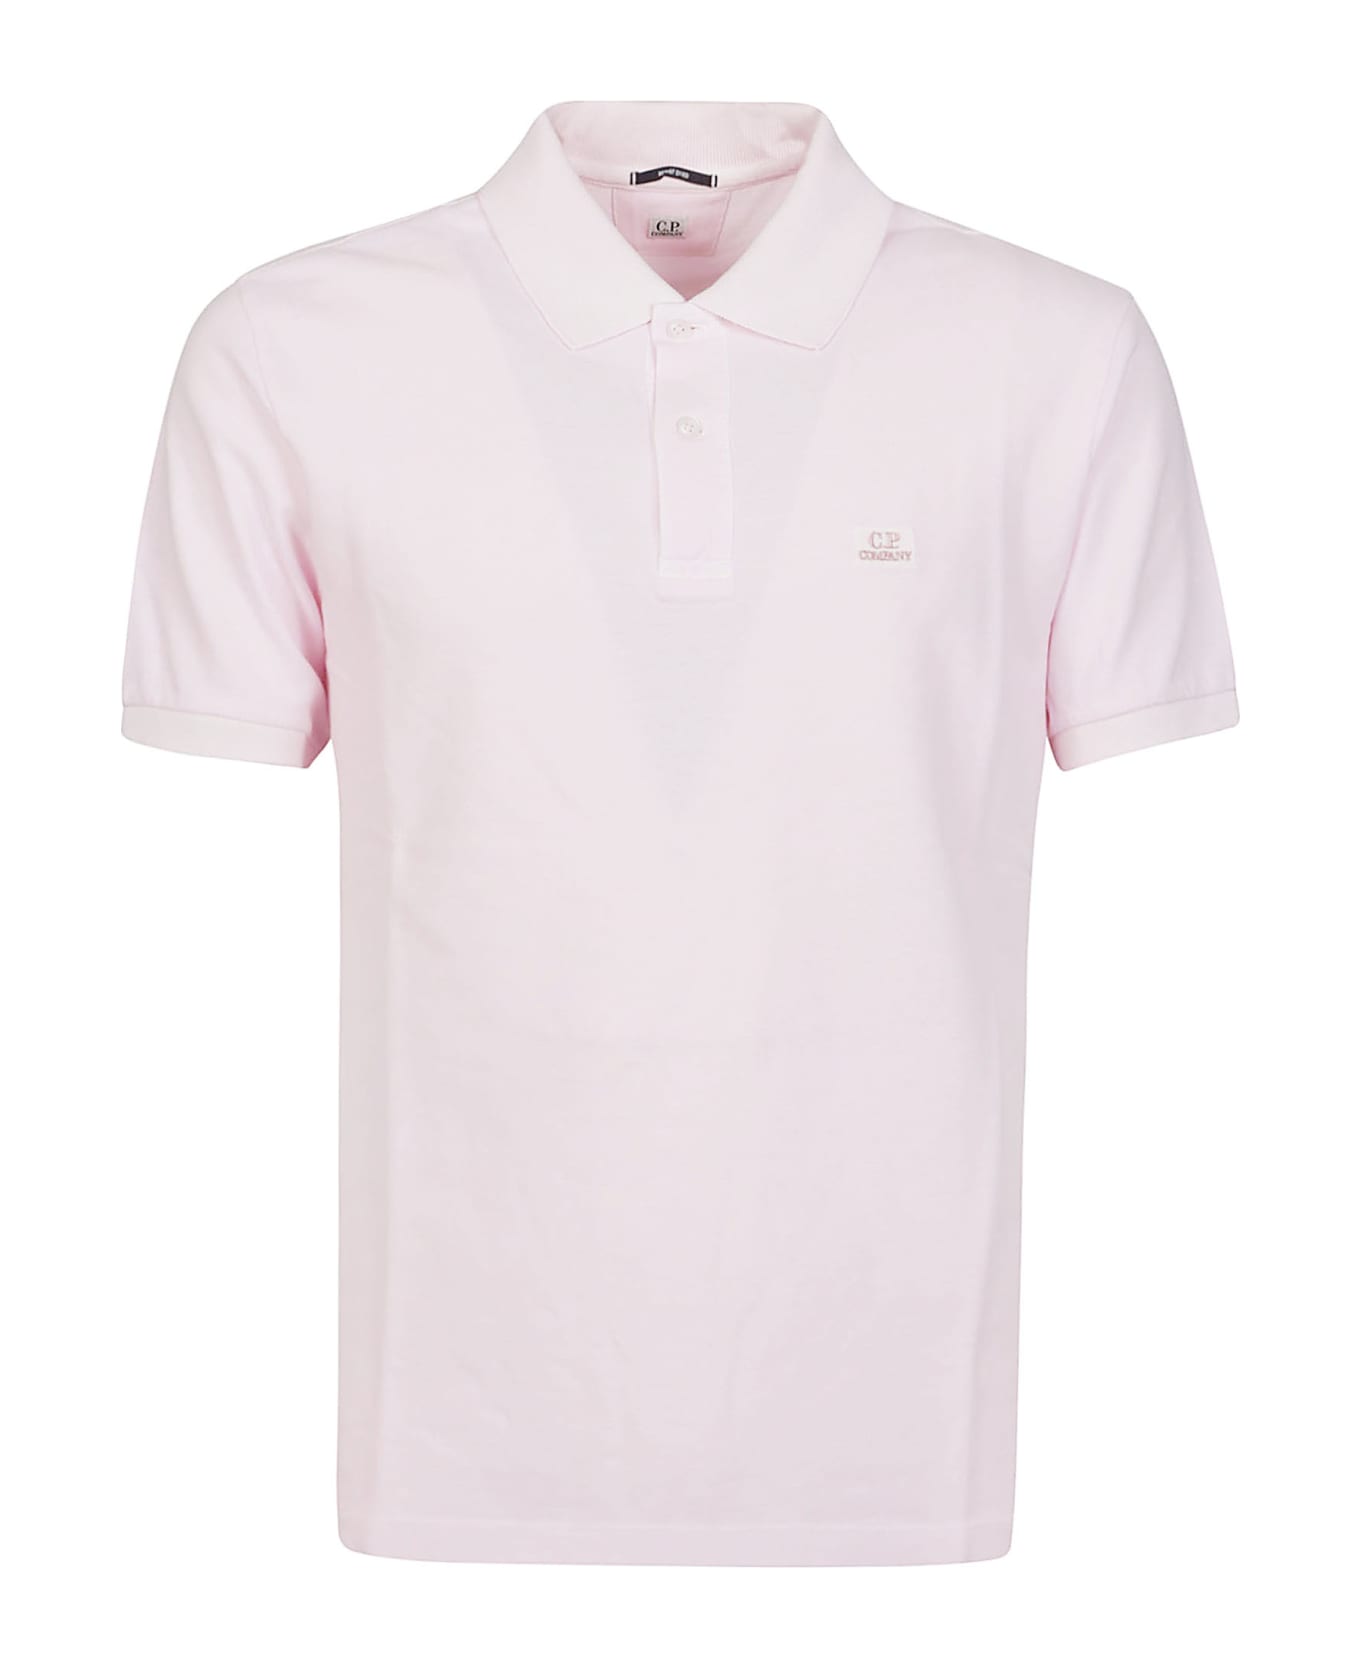 C.P. Company 24/1 Piquet Resist Dyed Short Sleeve Polo Shirt - Heavenly Pink